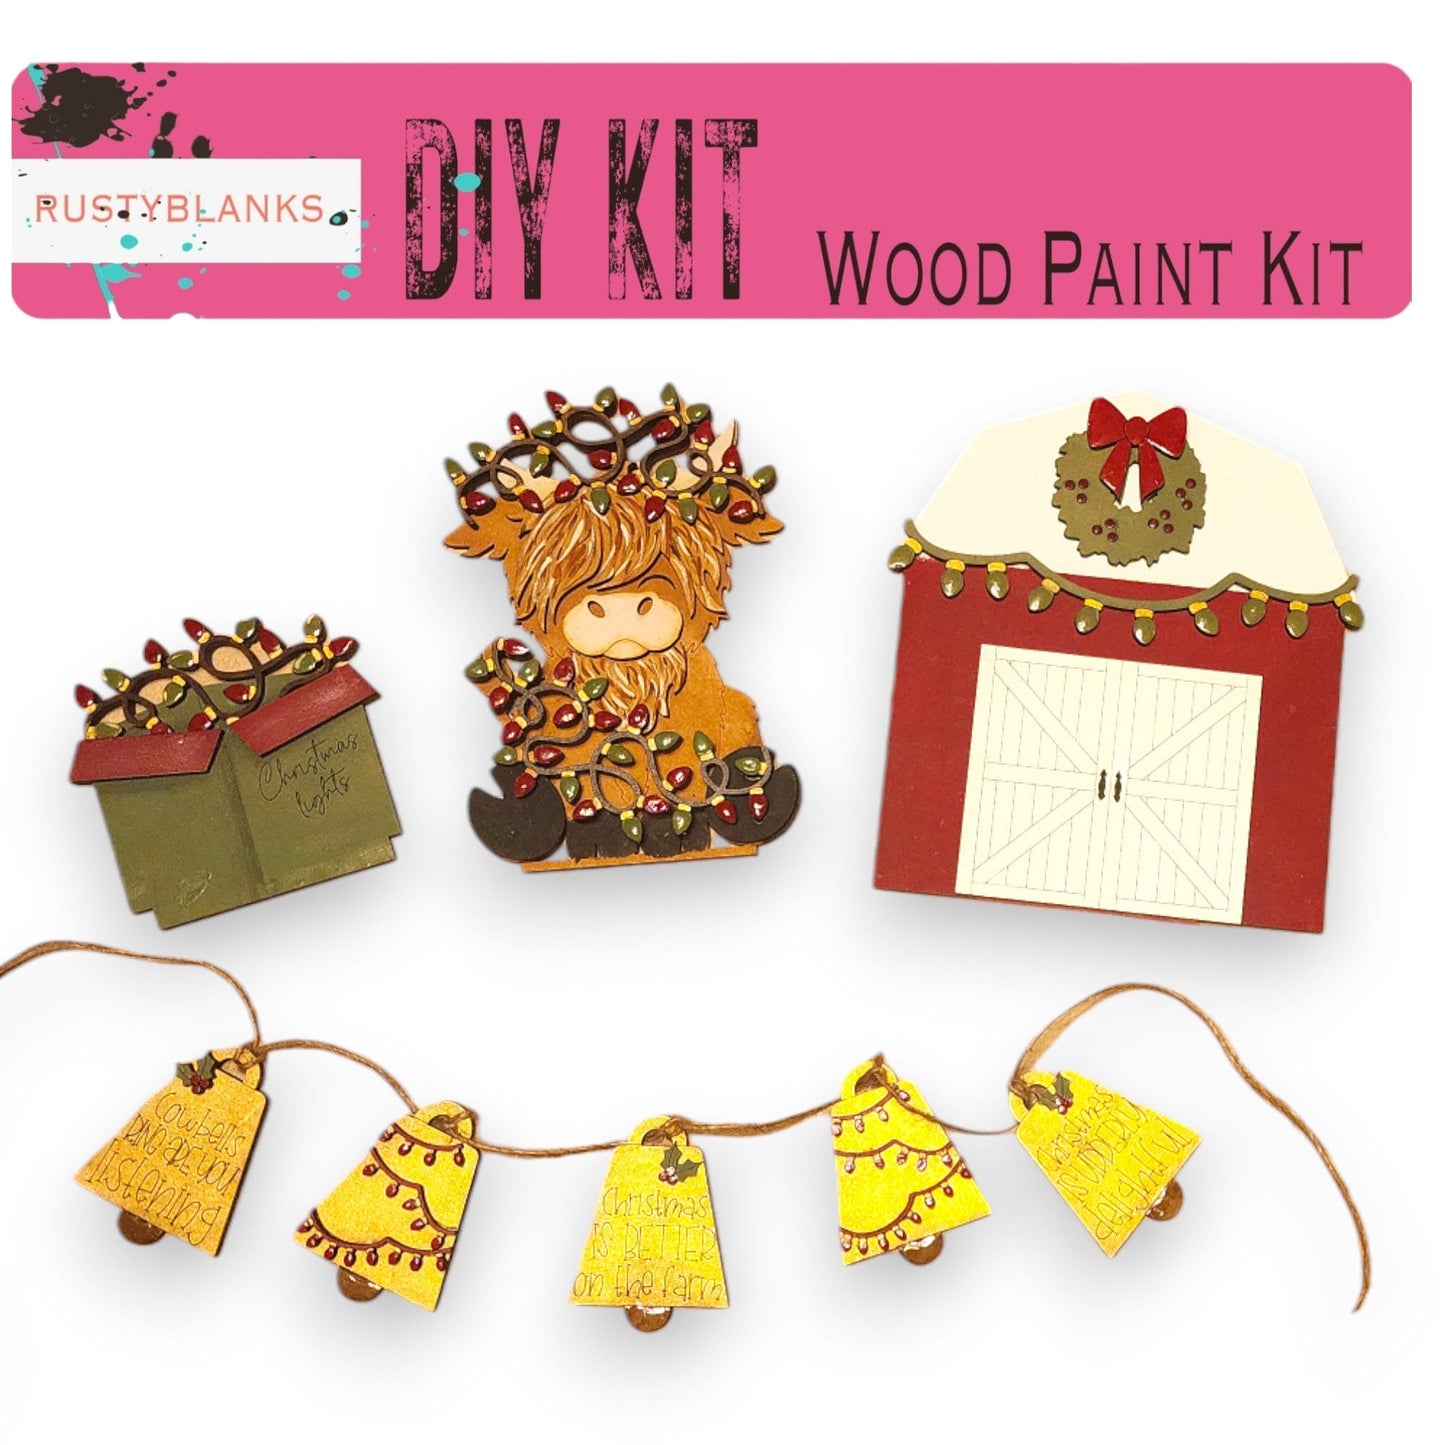 a picture of a wooden paint kit with decorations